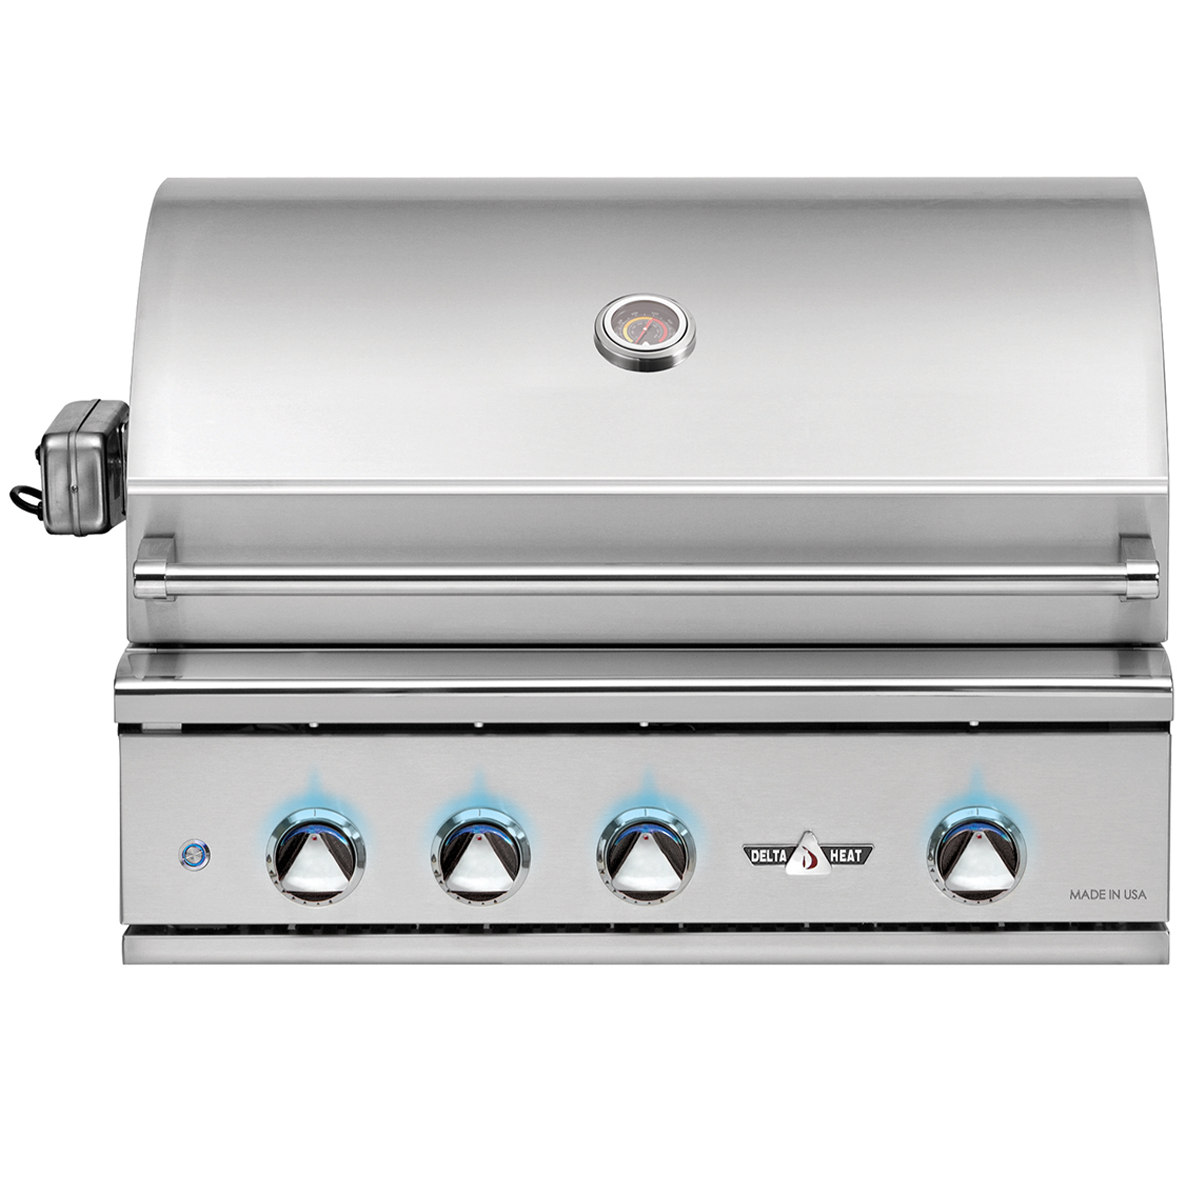 32” OUTDOOR GAS GRILL